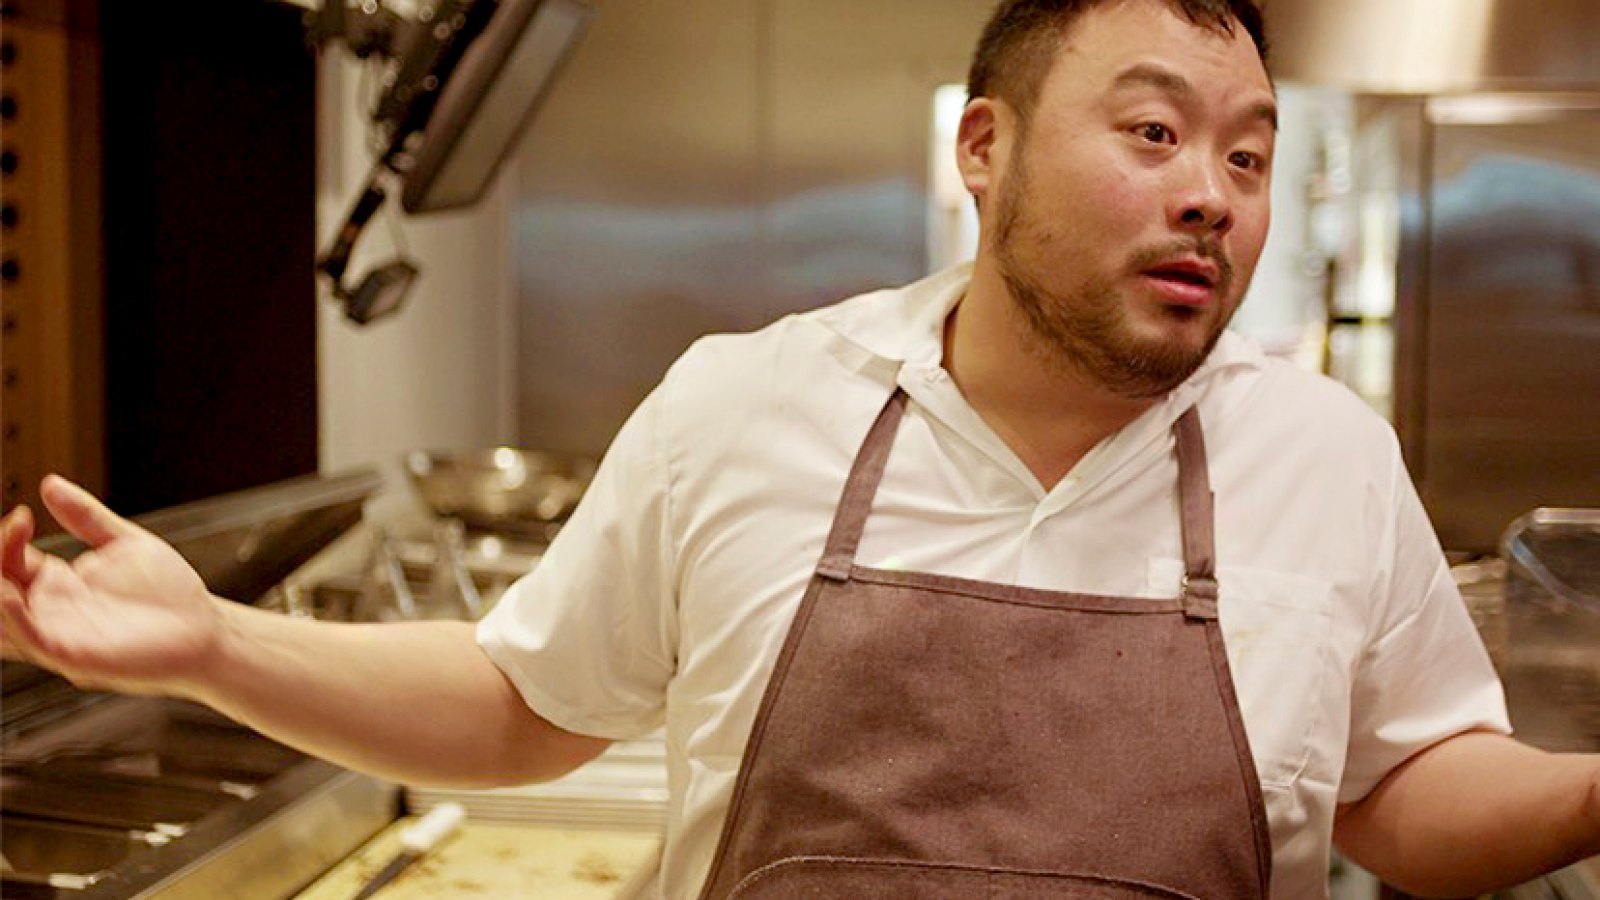 David Chang's New Food Docuseries 'Ugly Delicious'